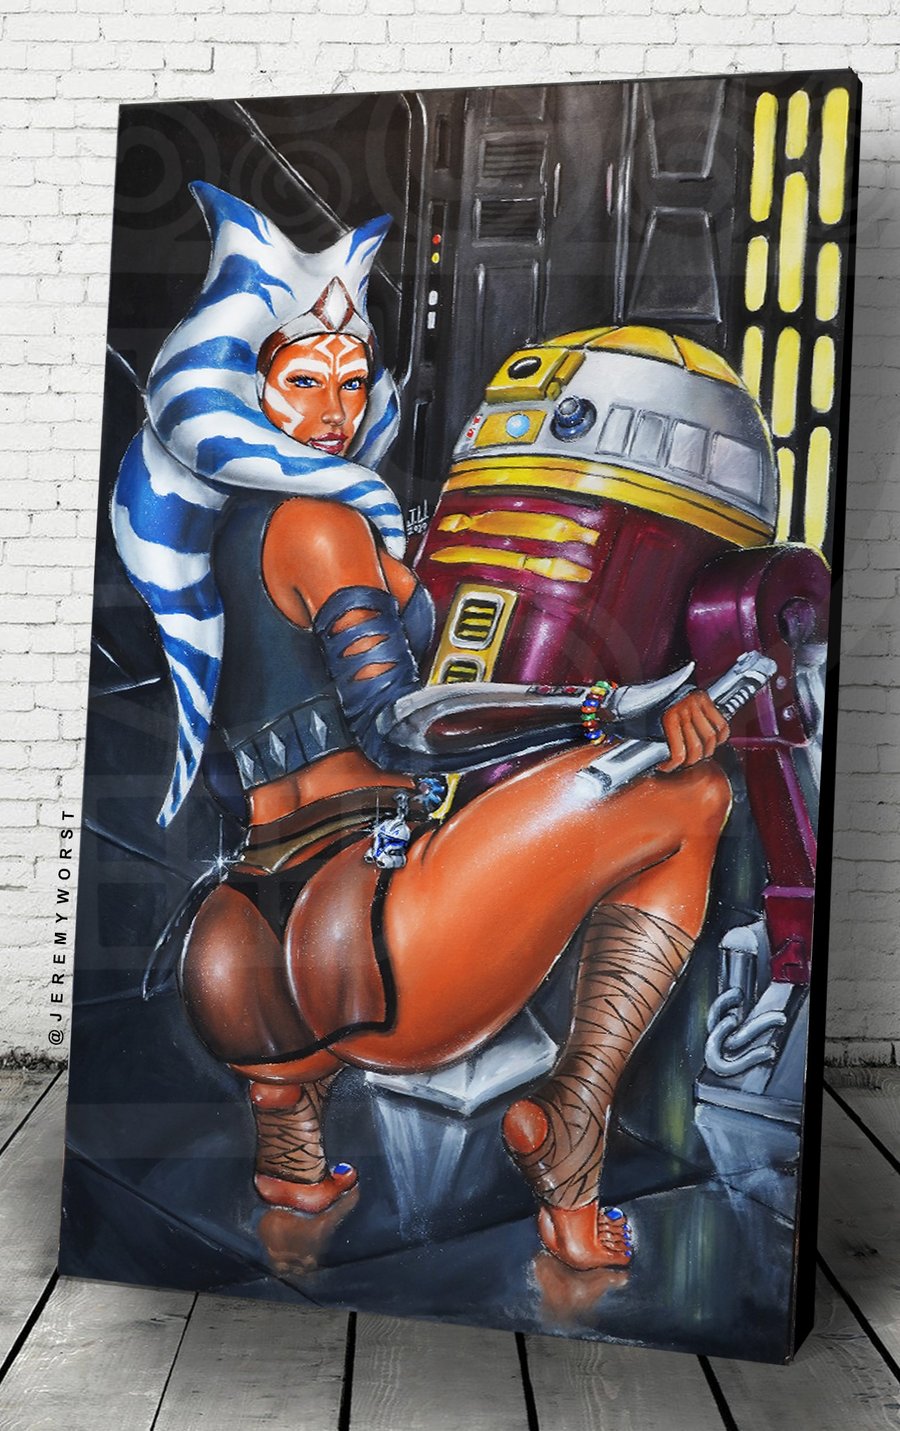 Image of Ahsoka by Jeremy Worst Acrylic Painting Posters Canvas Wall art Star Wars Decor